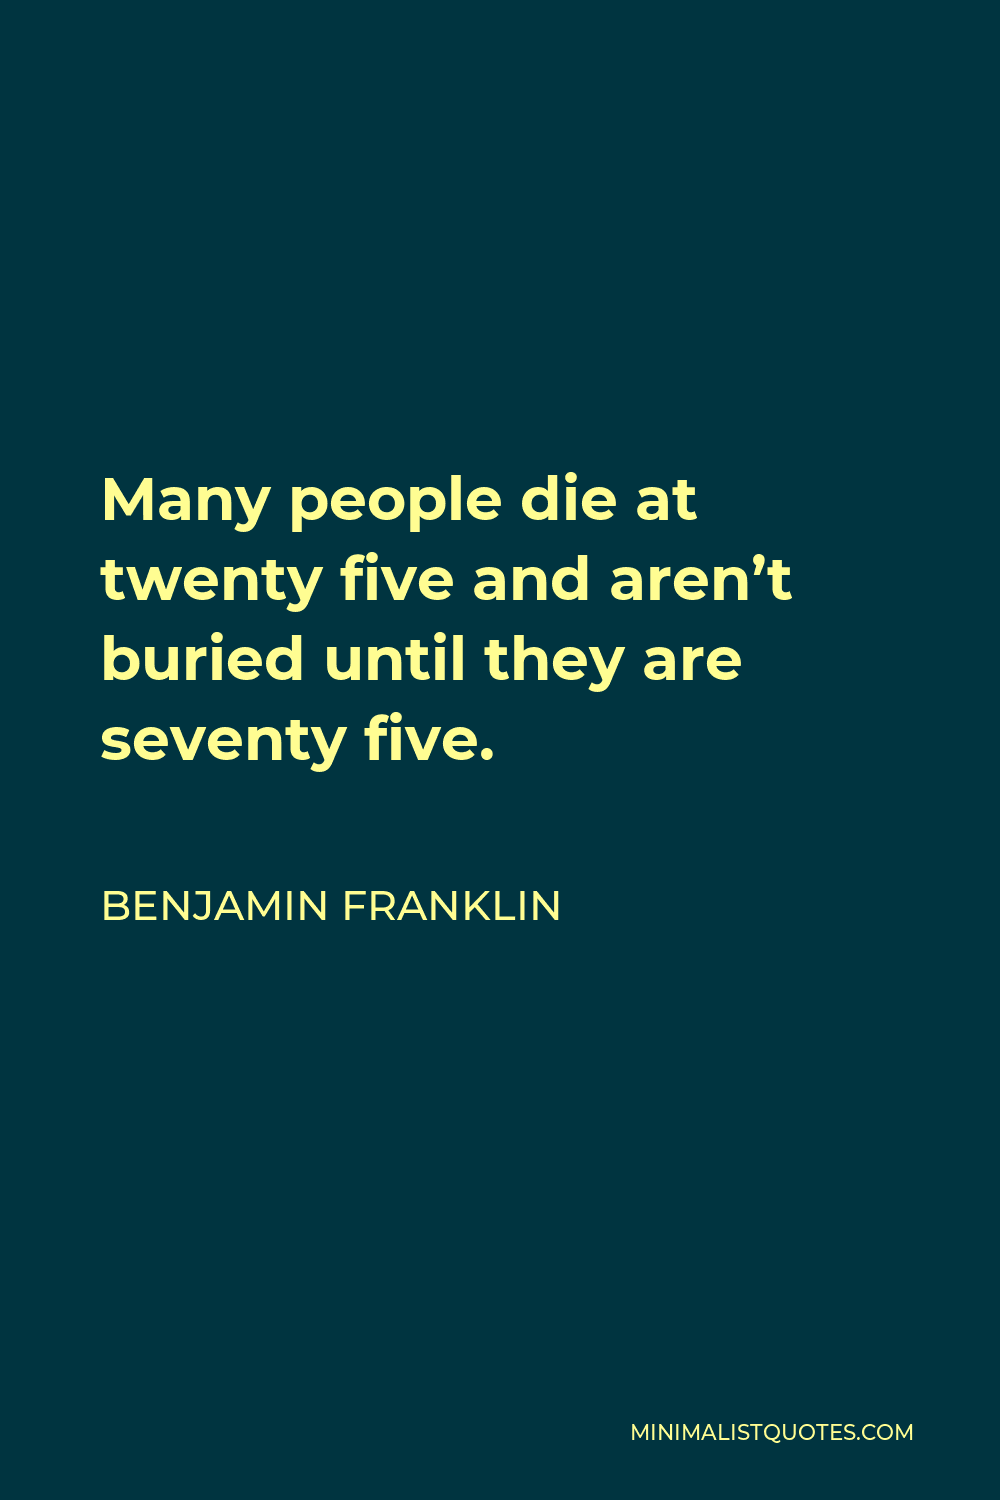 Benjamin Franklin Quote - Many people die at twenty five and aren’t buried until they are seventy five.